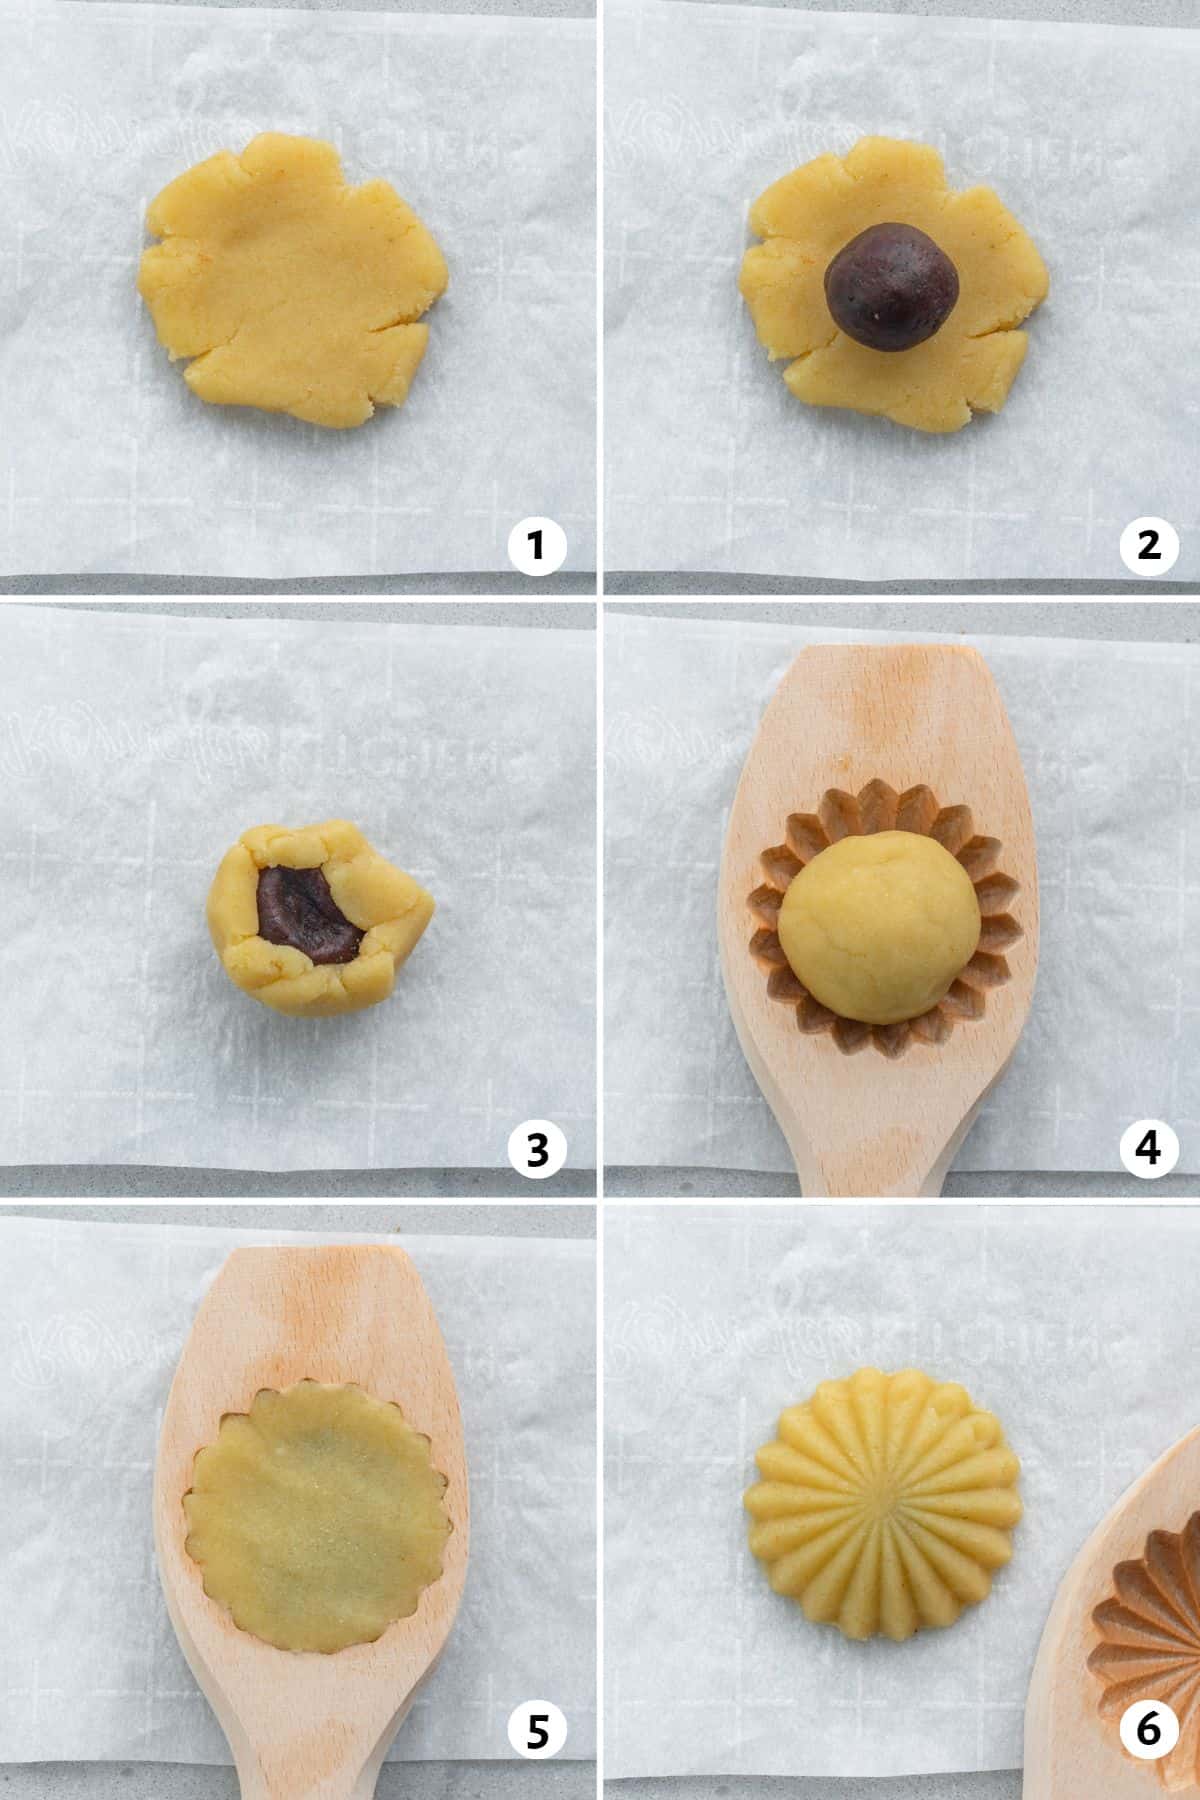 6 image collage making stuffed dough into shapes: 1- dough ball, 2- dough ball pressed into a cup, 3- date paste added, 4- dough balled up around filling place in mold, 5- dough pressed into mold, 6- dough after removed from mold.